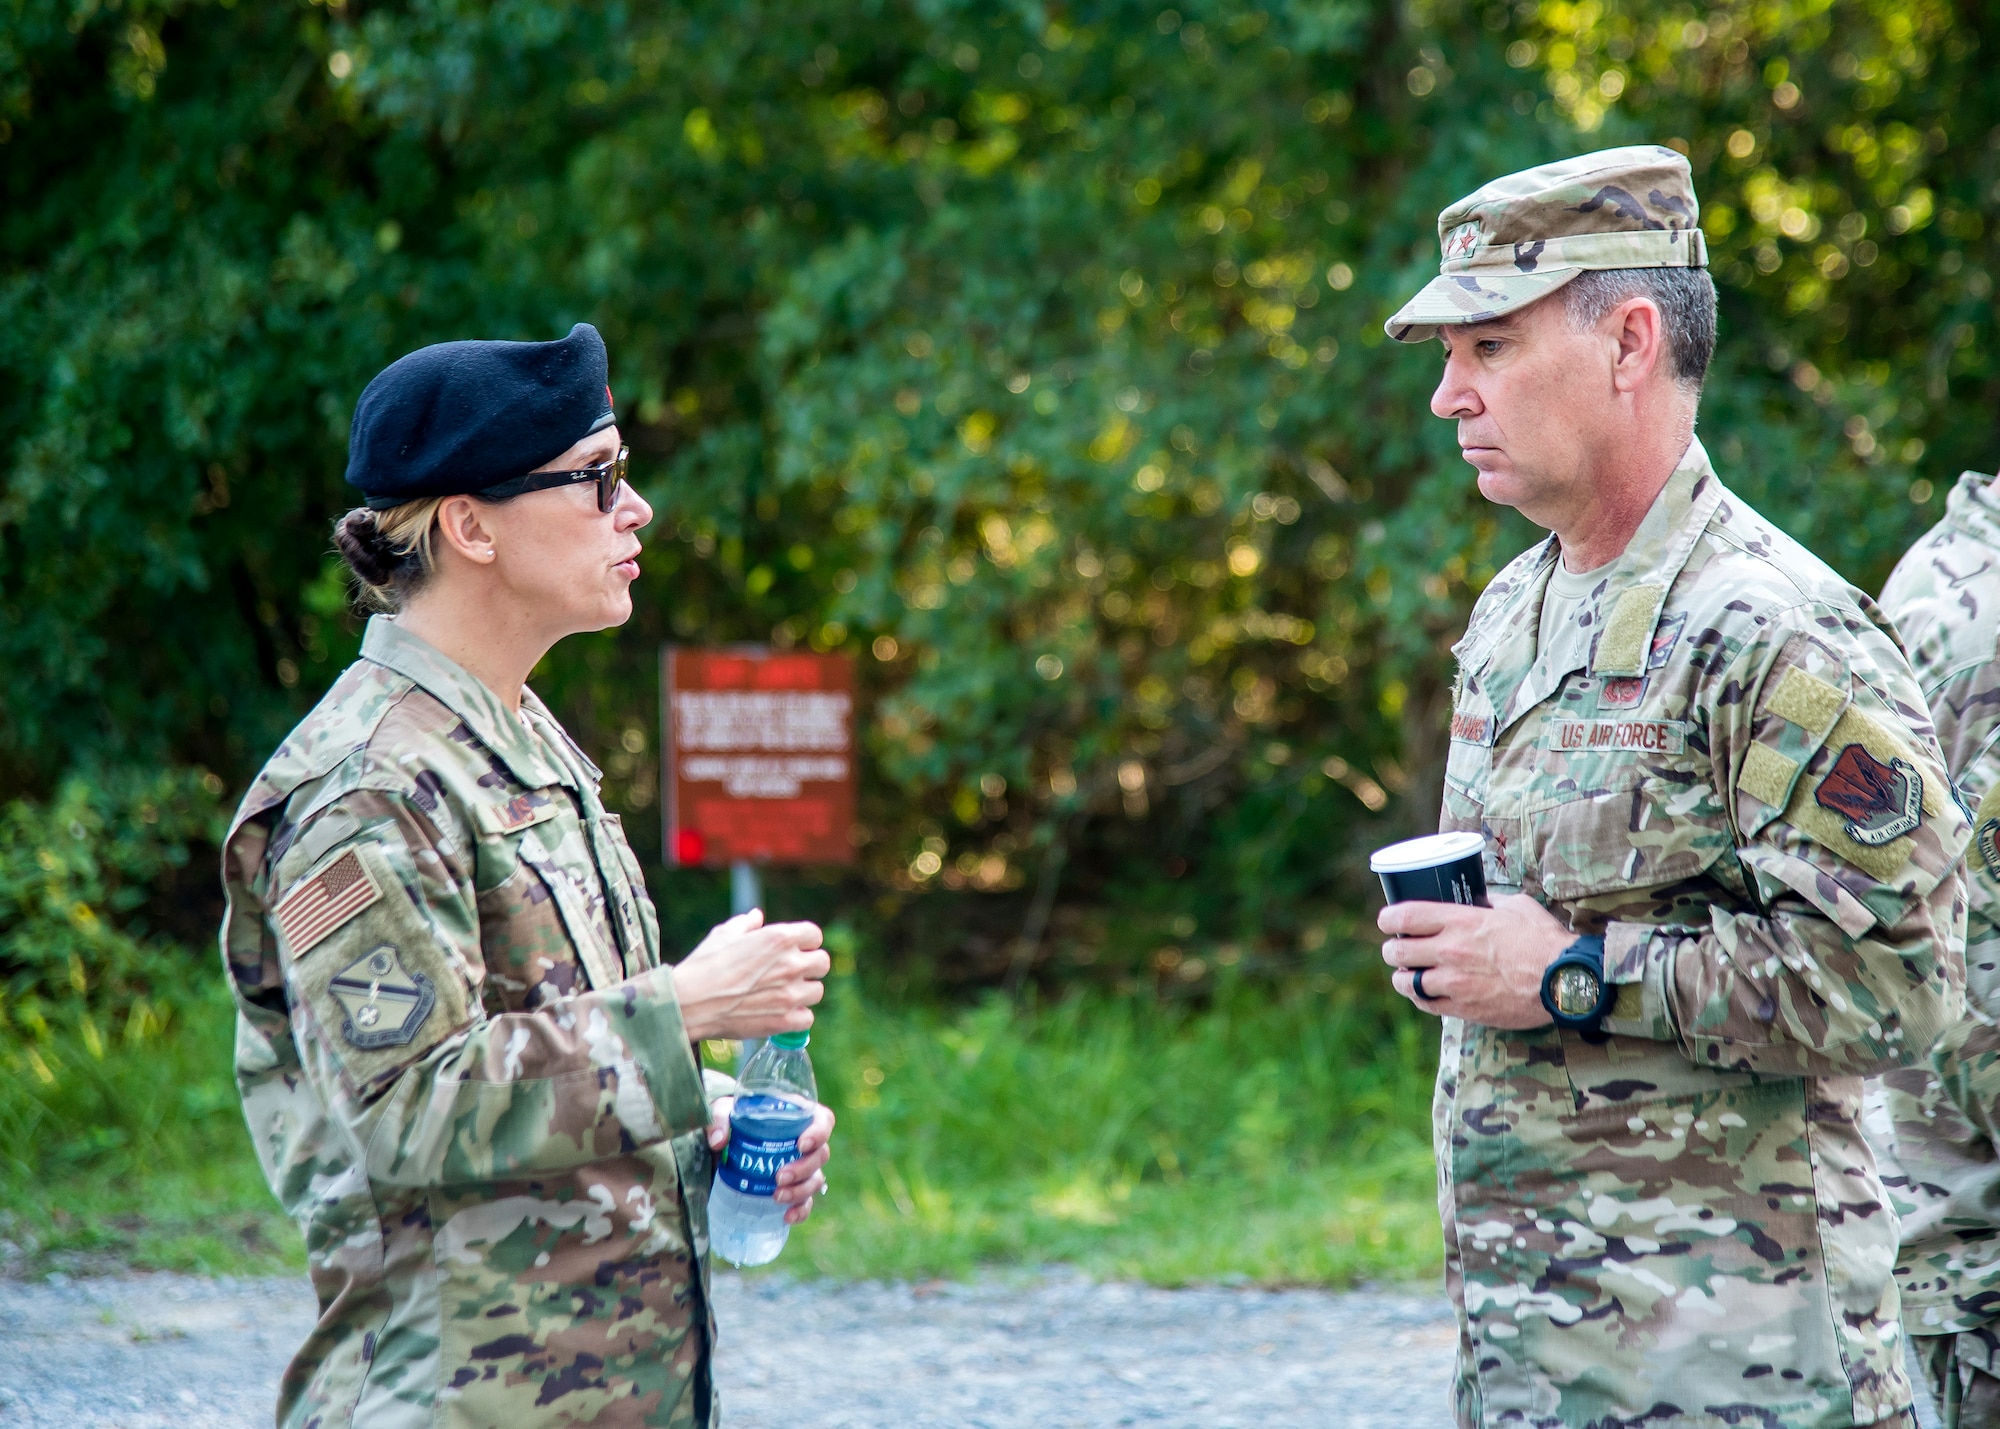 U.S. Air Force Col. Danielle Willis, left, 93d Air Ground Operations Wing vice commander, speaks with Maj. Gen. Chad Franks, Ninth Air Force commander, Aug. 9, 2019, at Moody Air Force Base, Ga. Franks, who on separate occasions served as the commander for the 23d Wing and 347th Rescue Group, is a command pilot with more than 3,300 hours in multiple aircraft including HC-130J Combat King II and HH-60G Pave Hawk. (U.S. Air Force photo by Airman 1st Class Eugene Oliver)